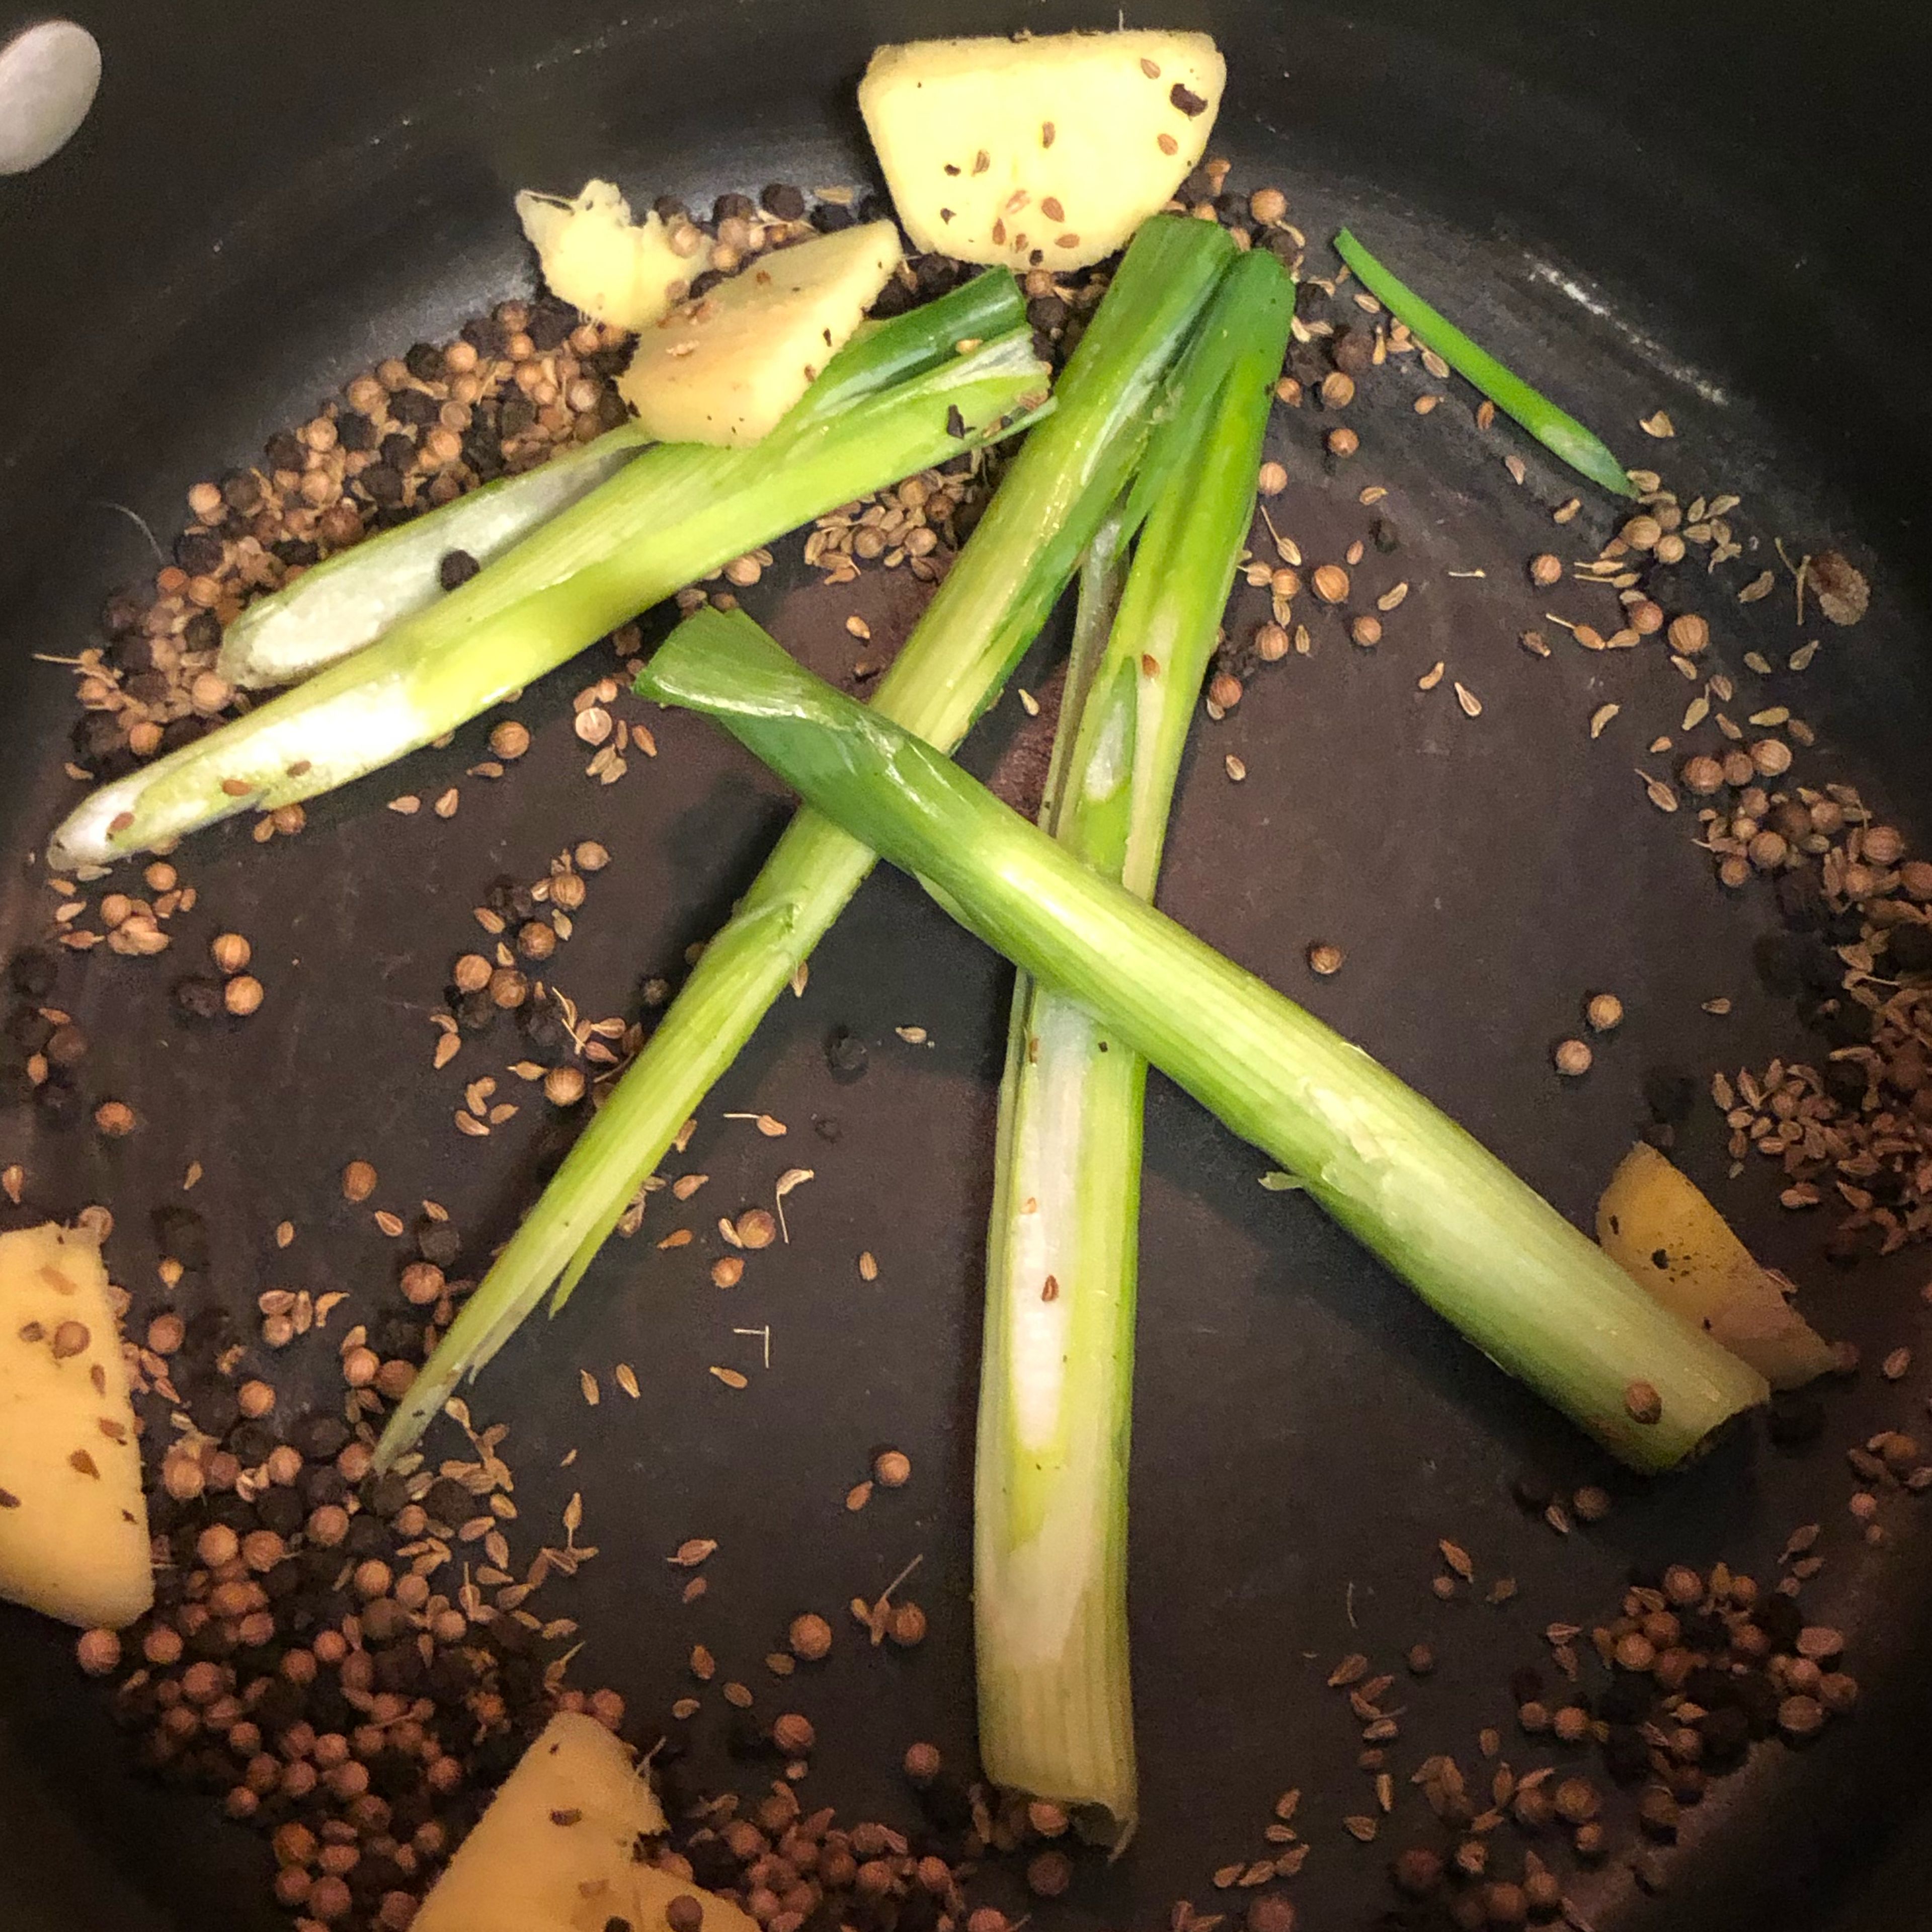 Peel and slice ginger. Trim the tips and ends of the green onion. Then split them. Save tips for serving! Add the ginger and green onion into the pot and let cook for 3 minutes. Pay attention to the smell, you don’t want it to burn.